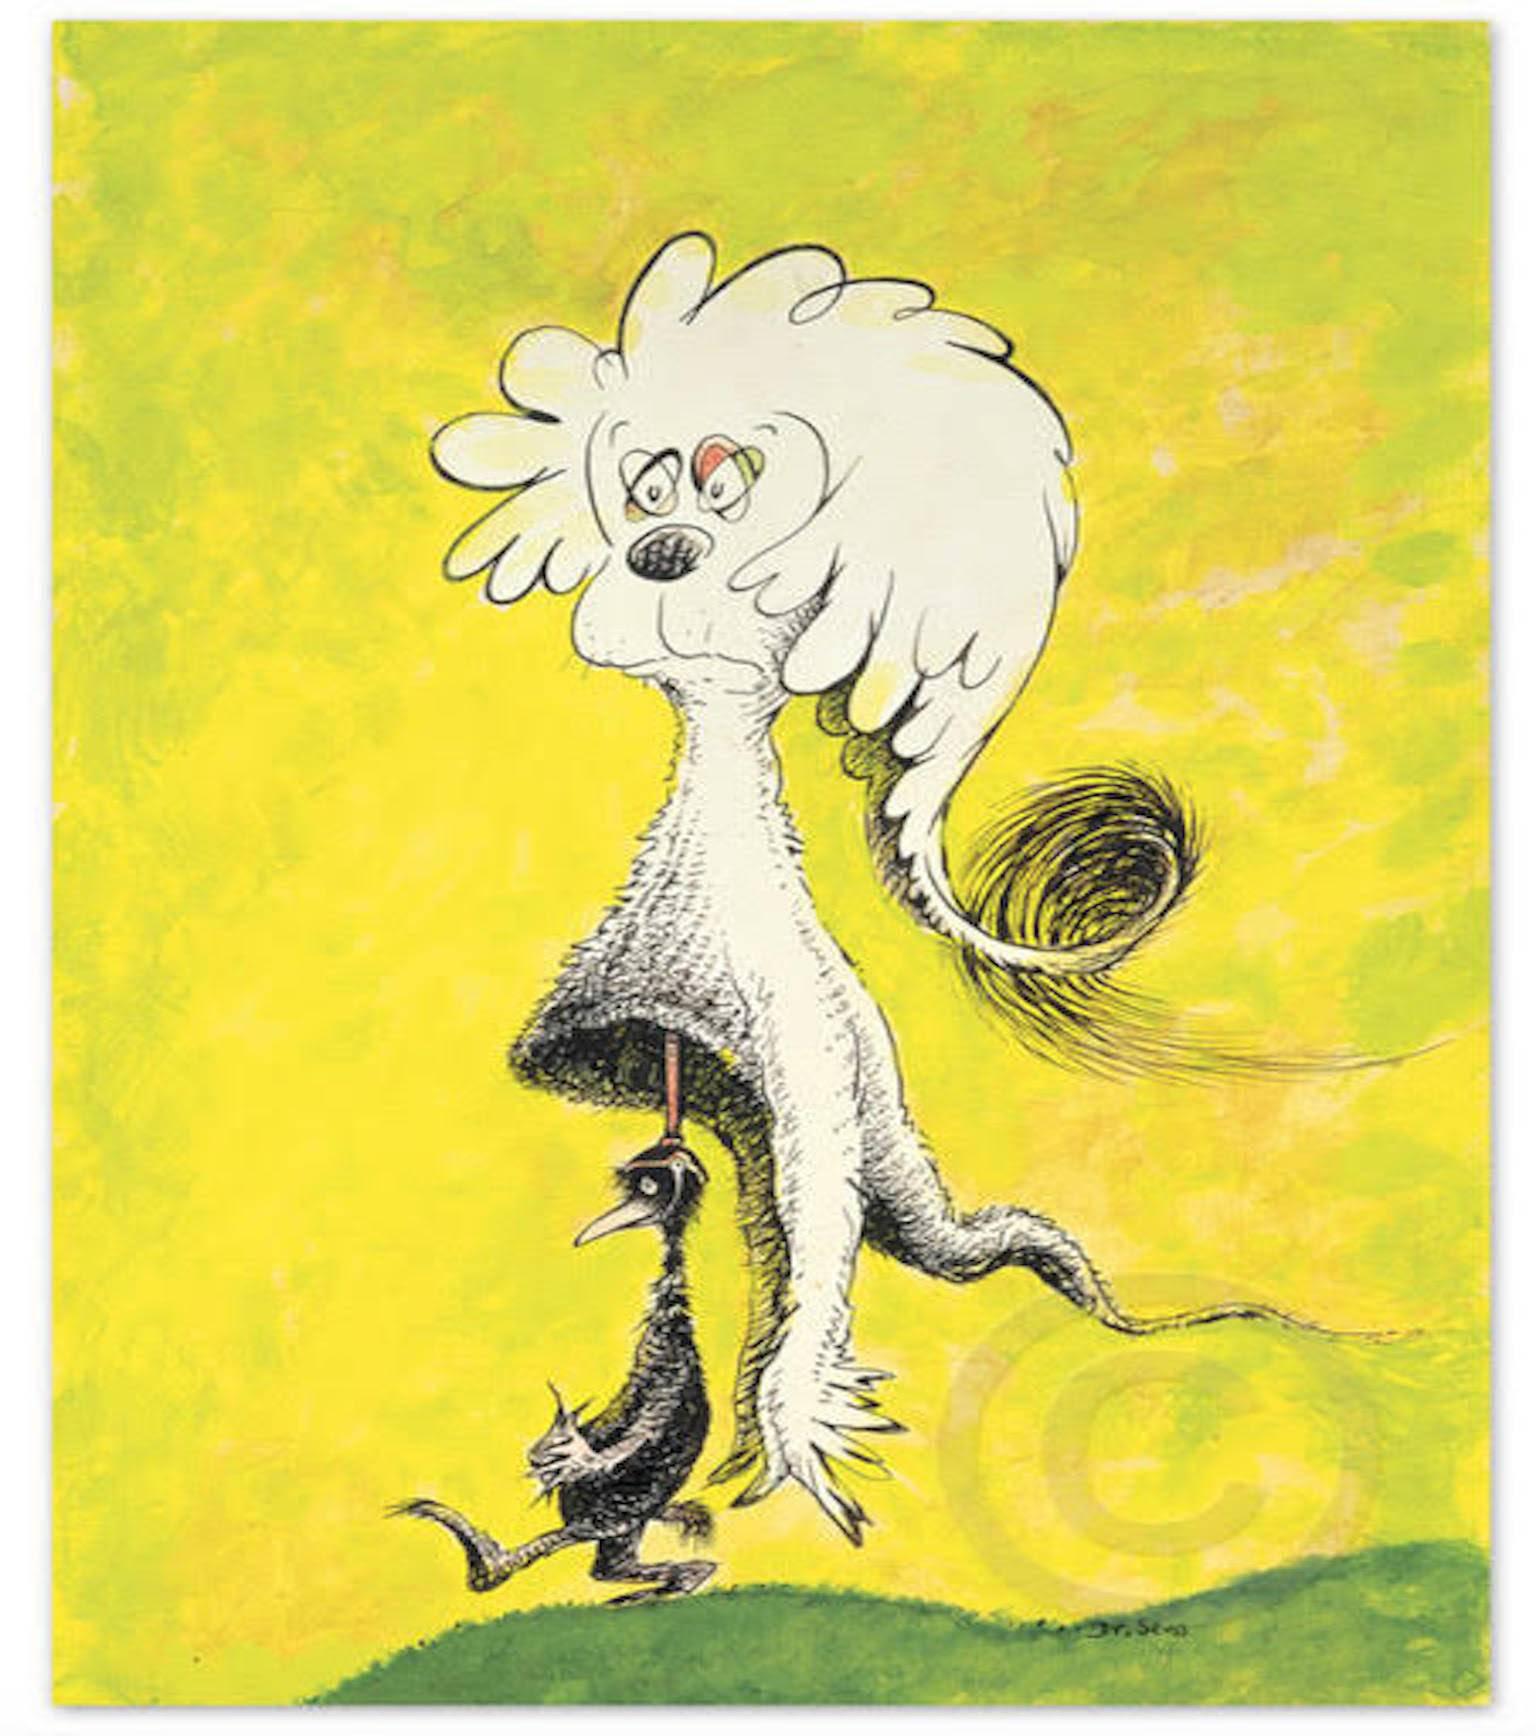 Dr. Suess, Fooling Nobody - Art by Dr. Seuss (Theodore Geisel)